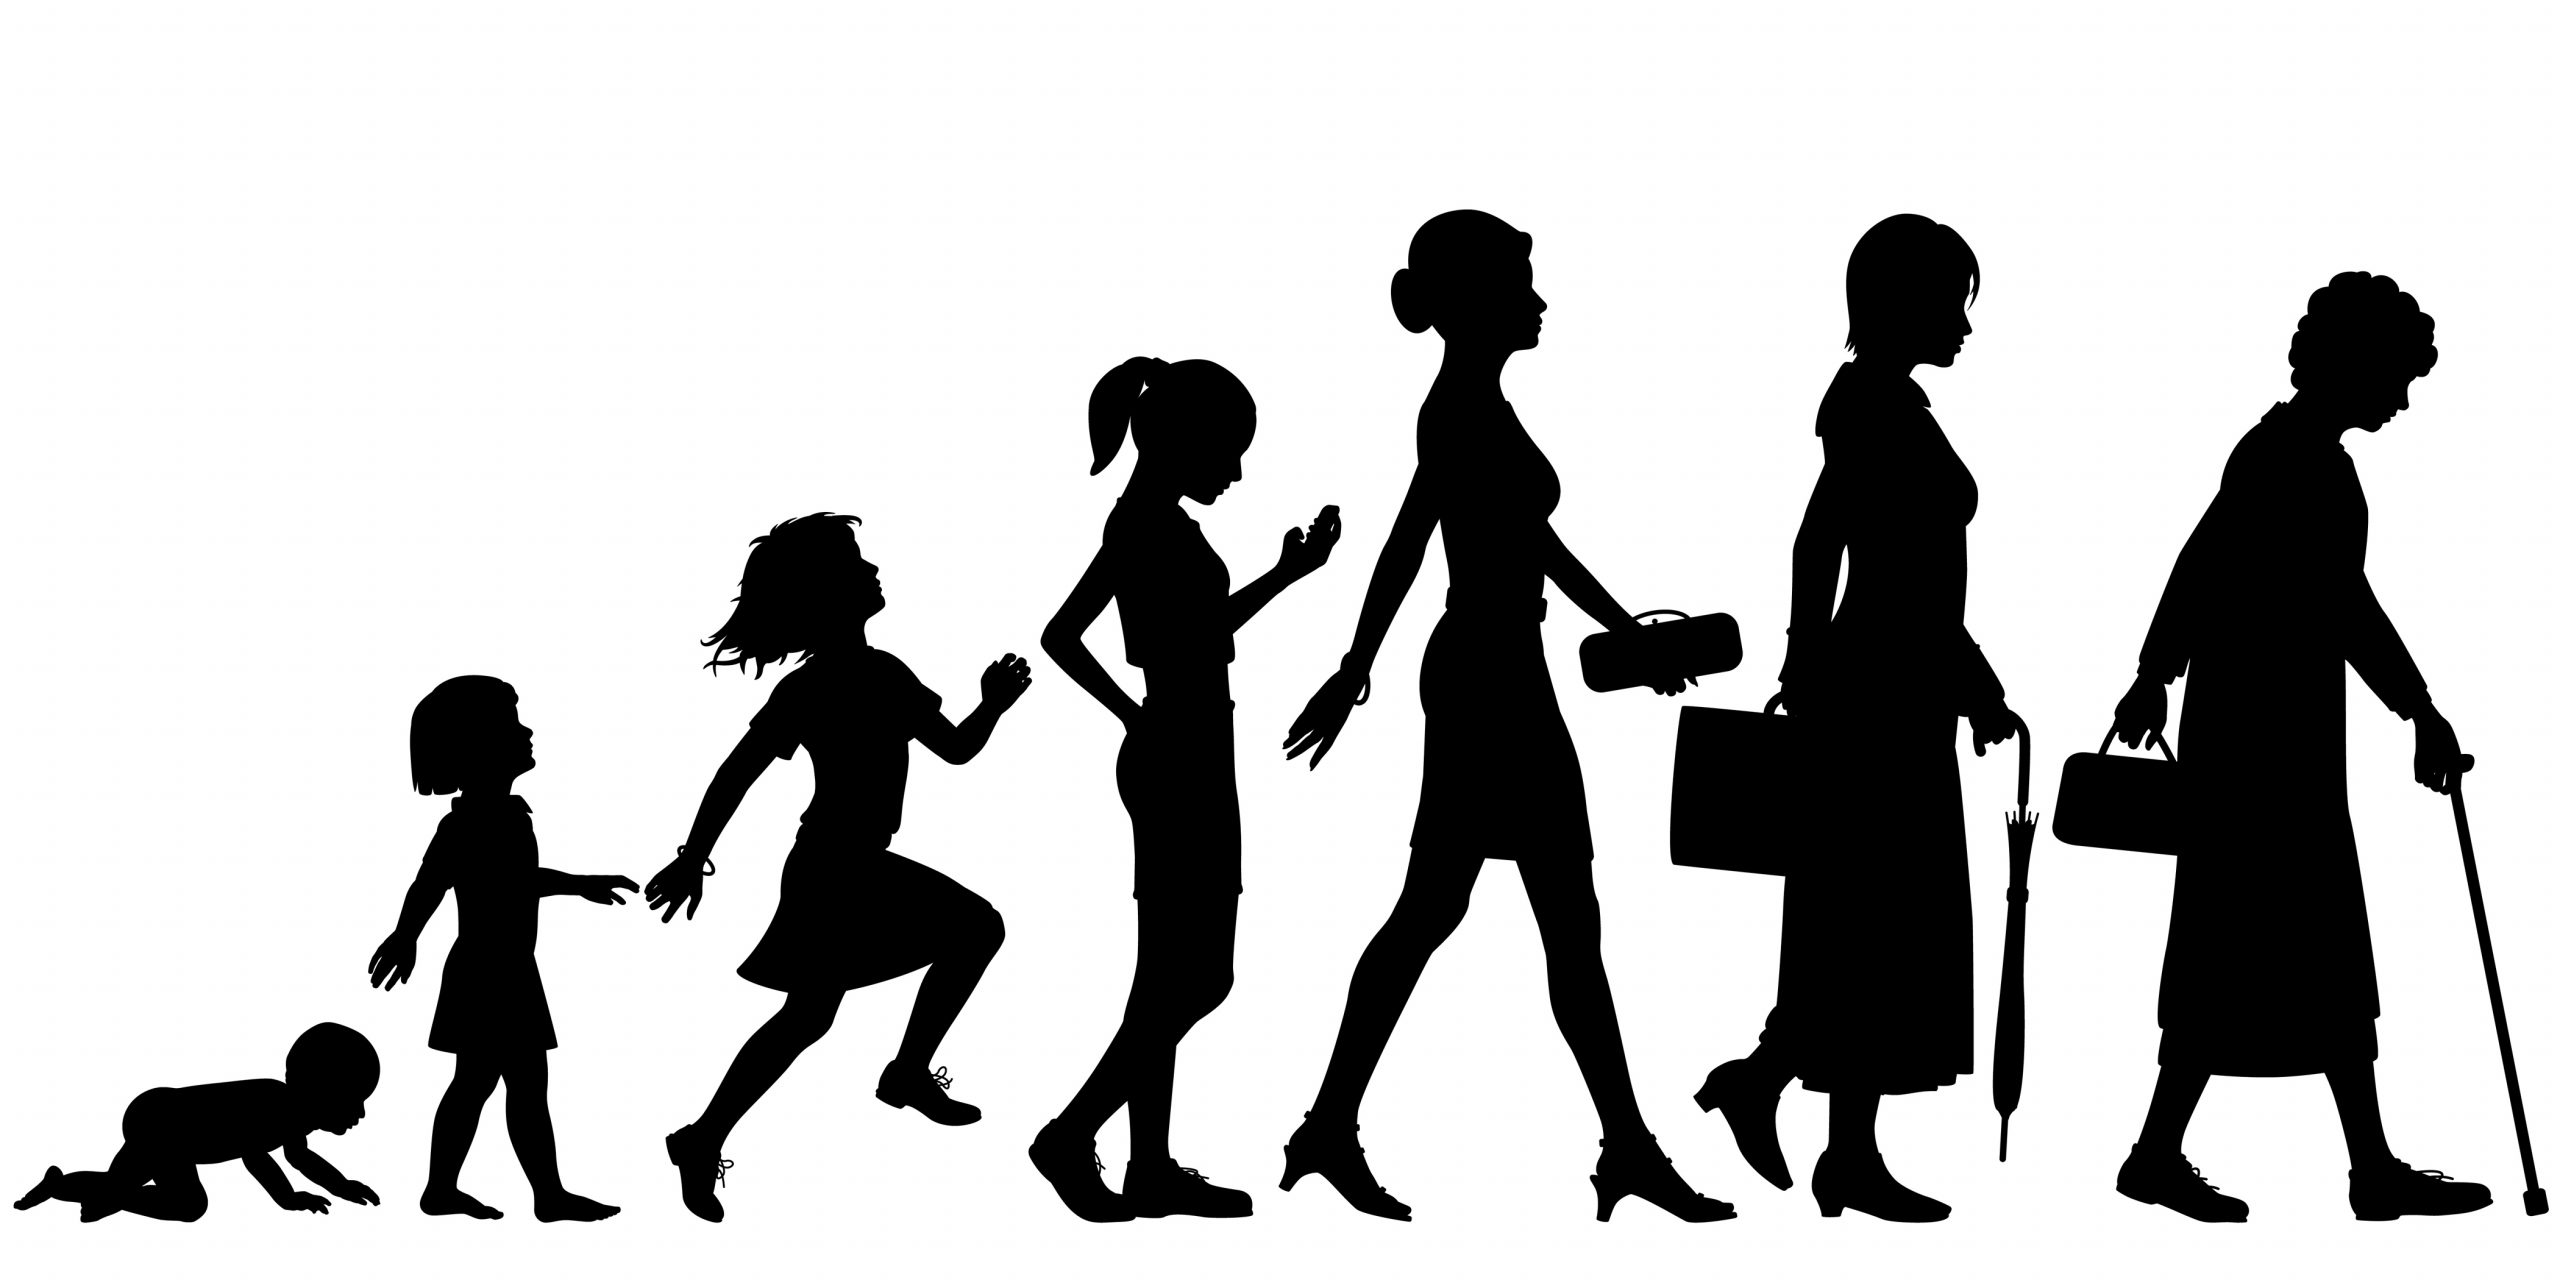 Image showing silhouettes of a female in seven stages of life